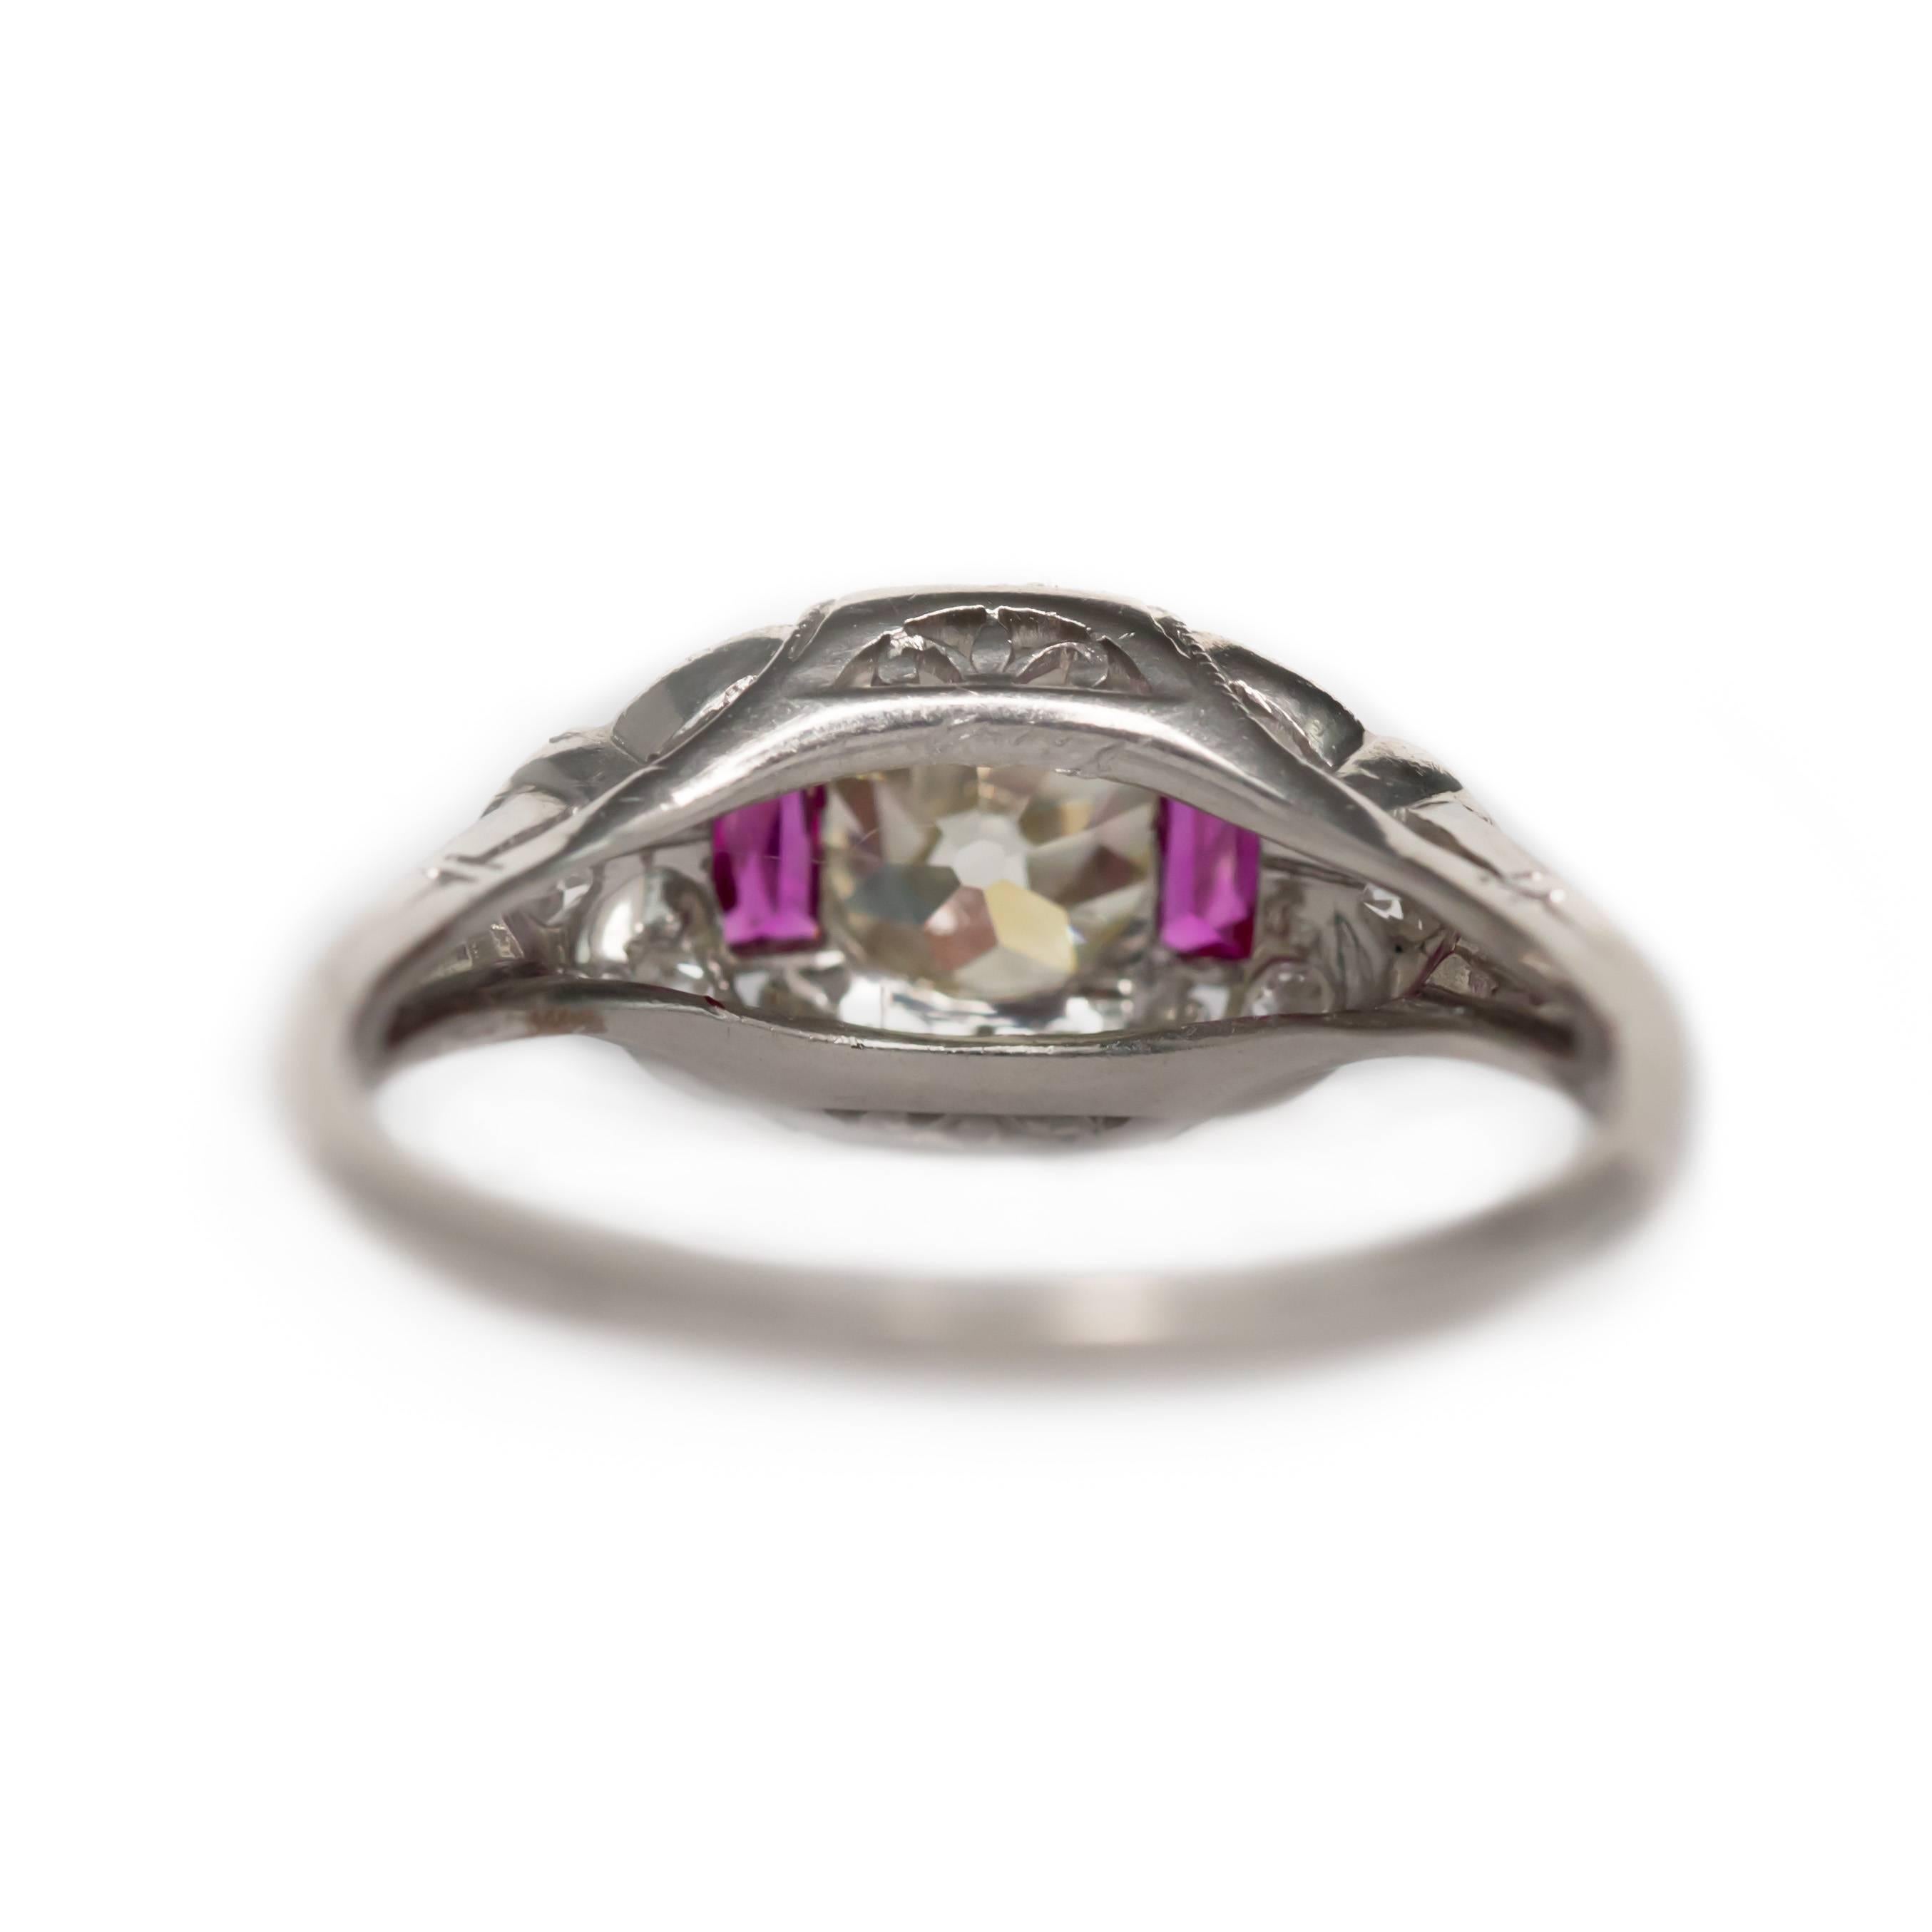 French Cut Art Deco Platinum GIA Certified Old European Brilliant Cut Diamond and Ruby Ring